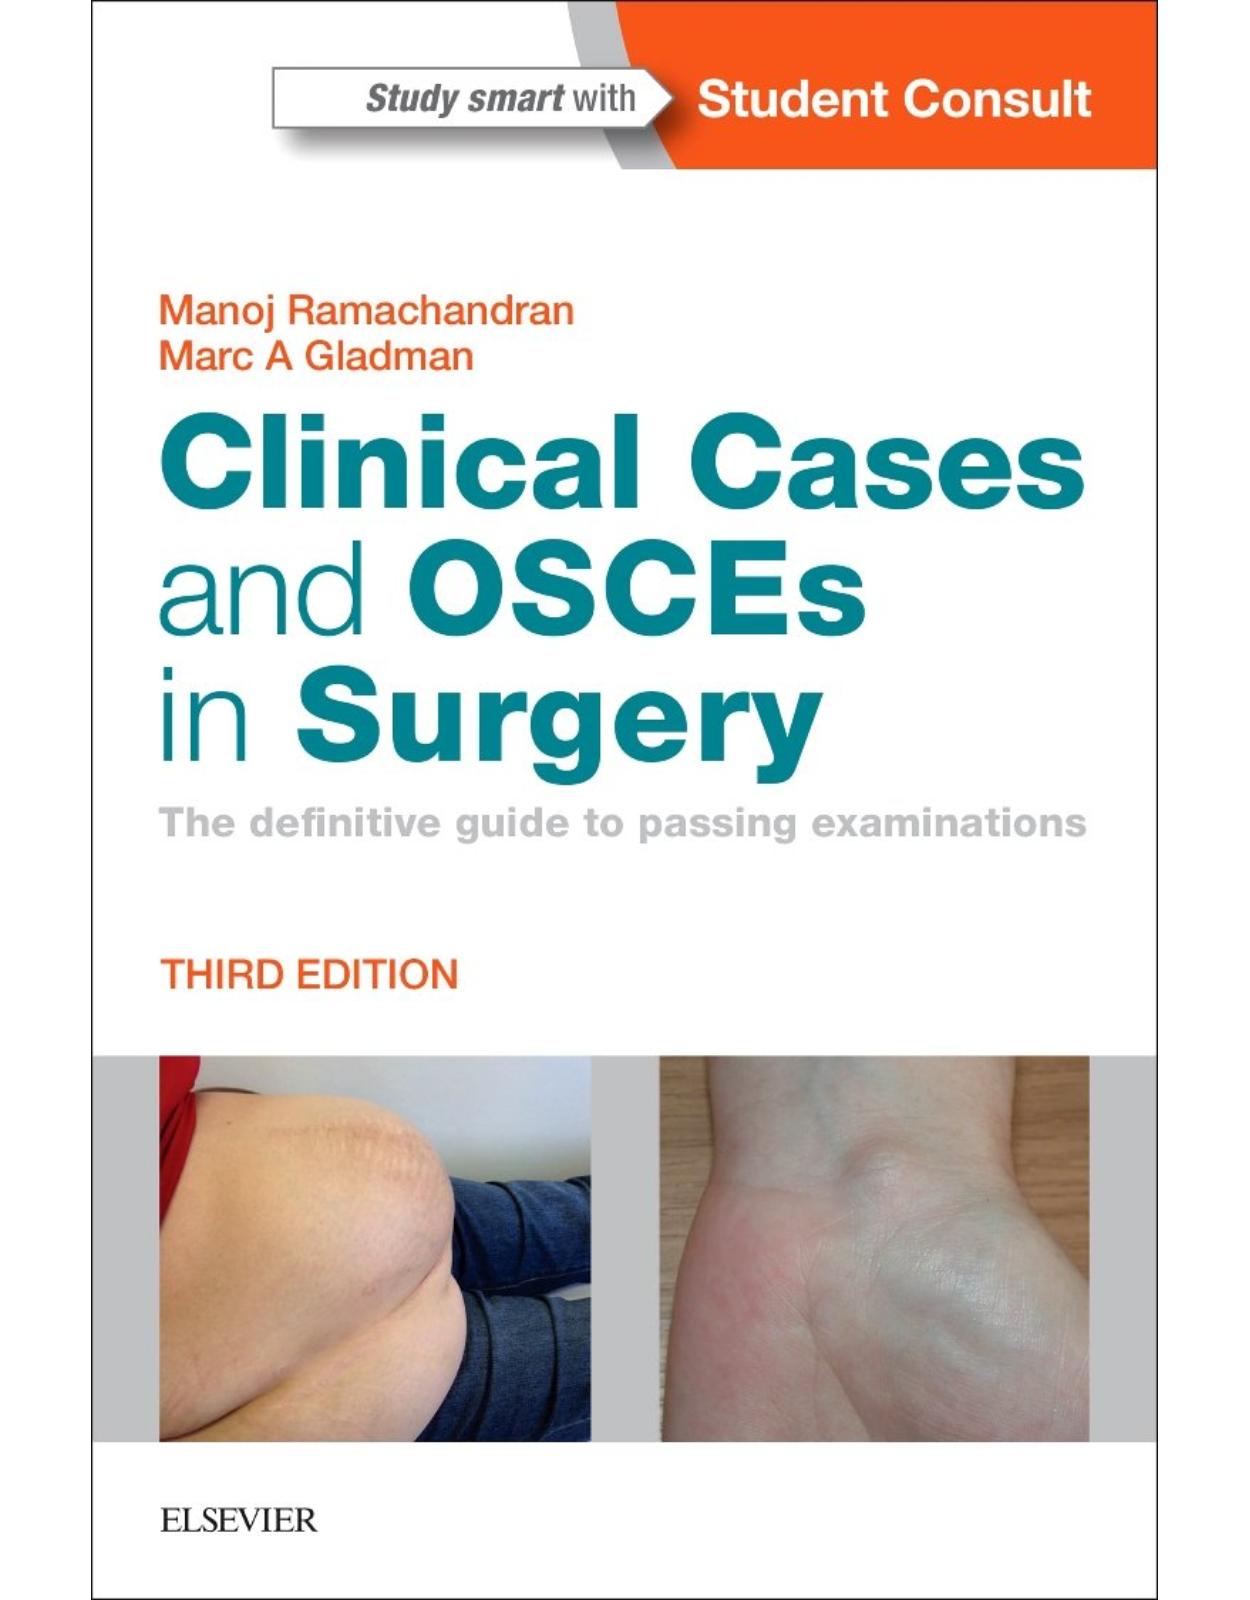 Clinical Cases and OSCEs in Surgery: The definitive guide to passing examinations, 3e